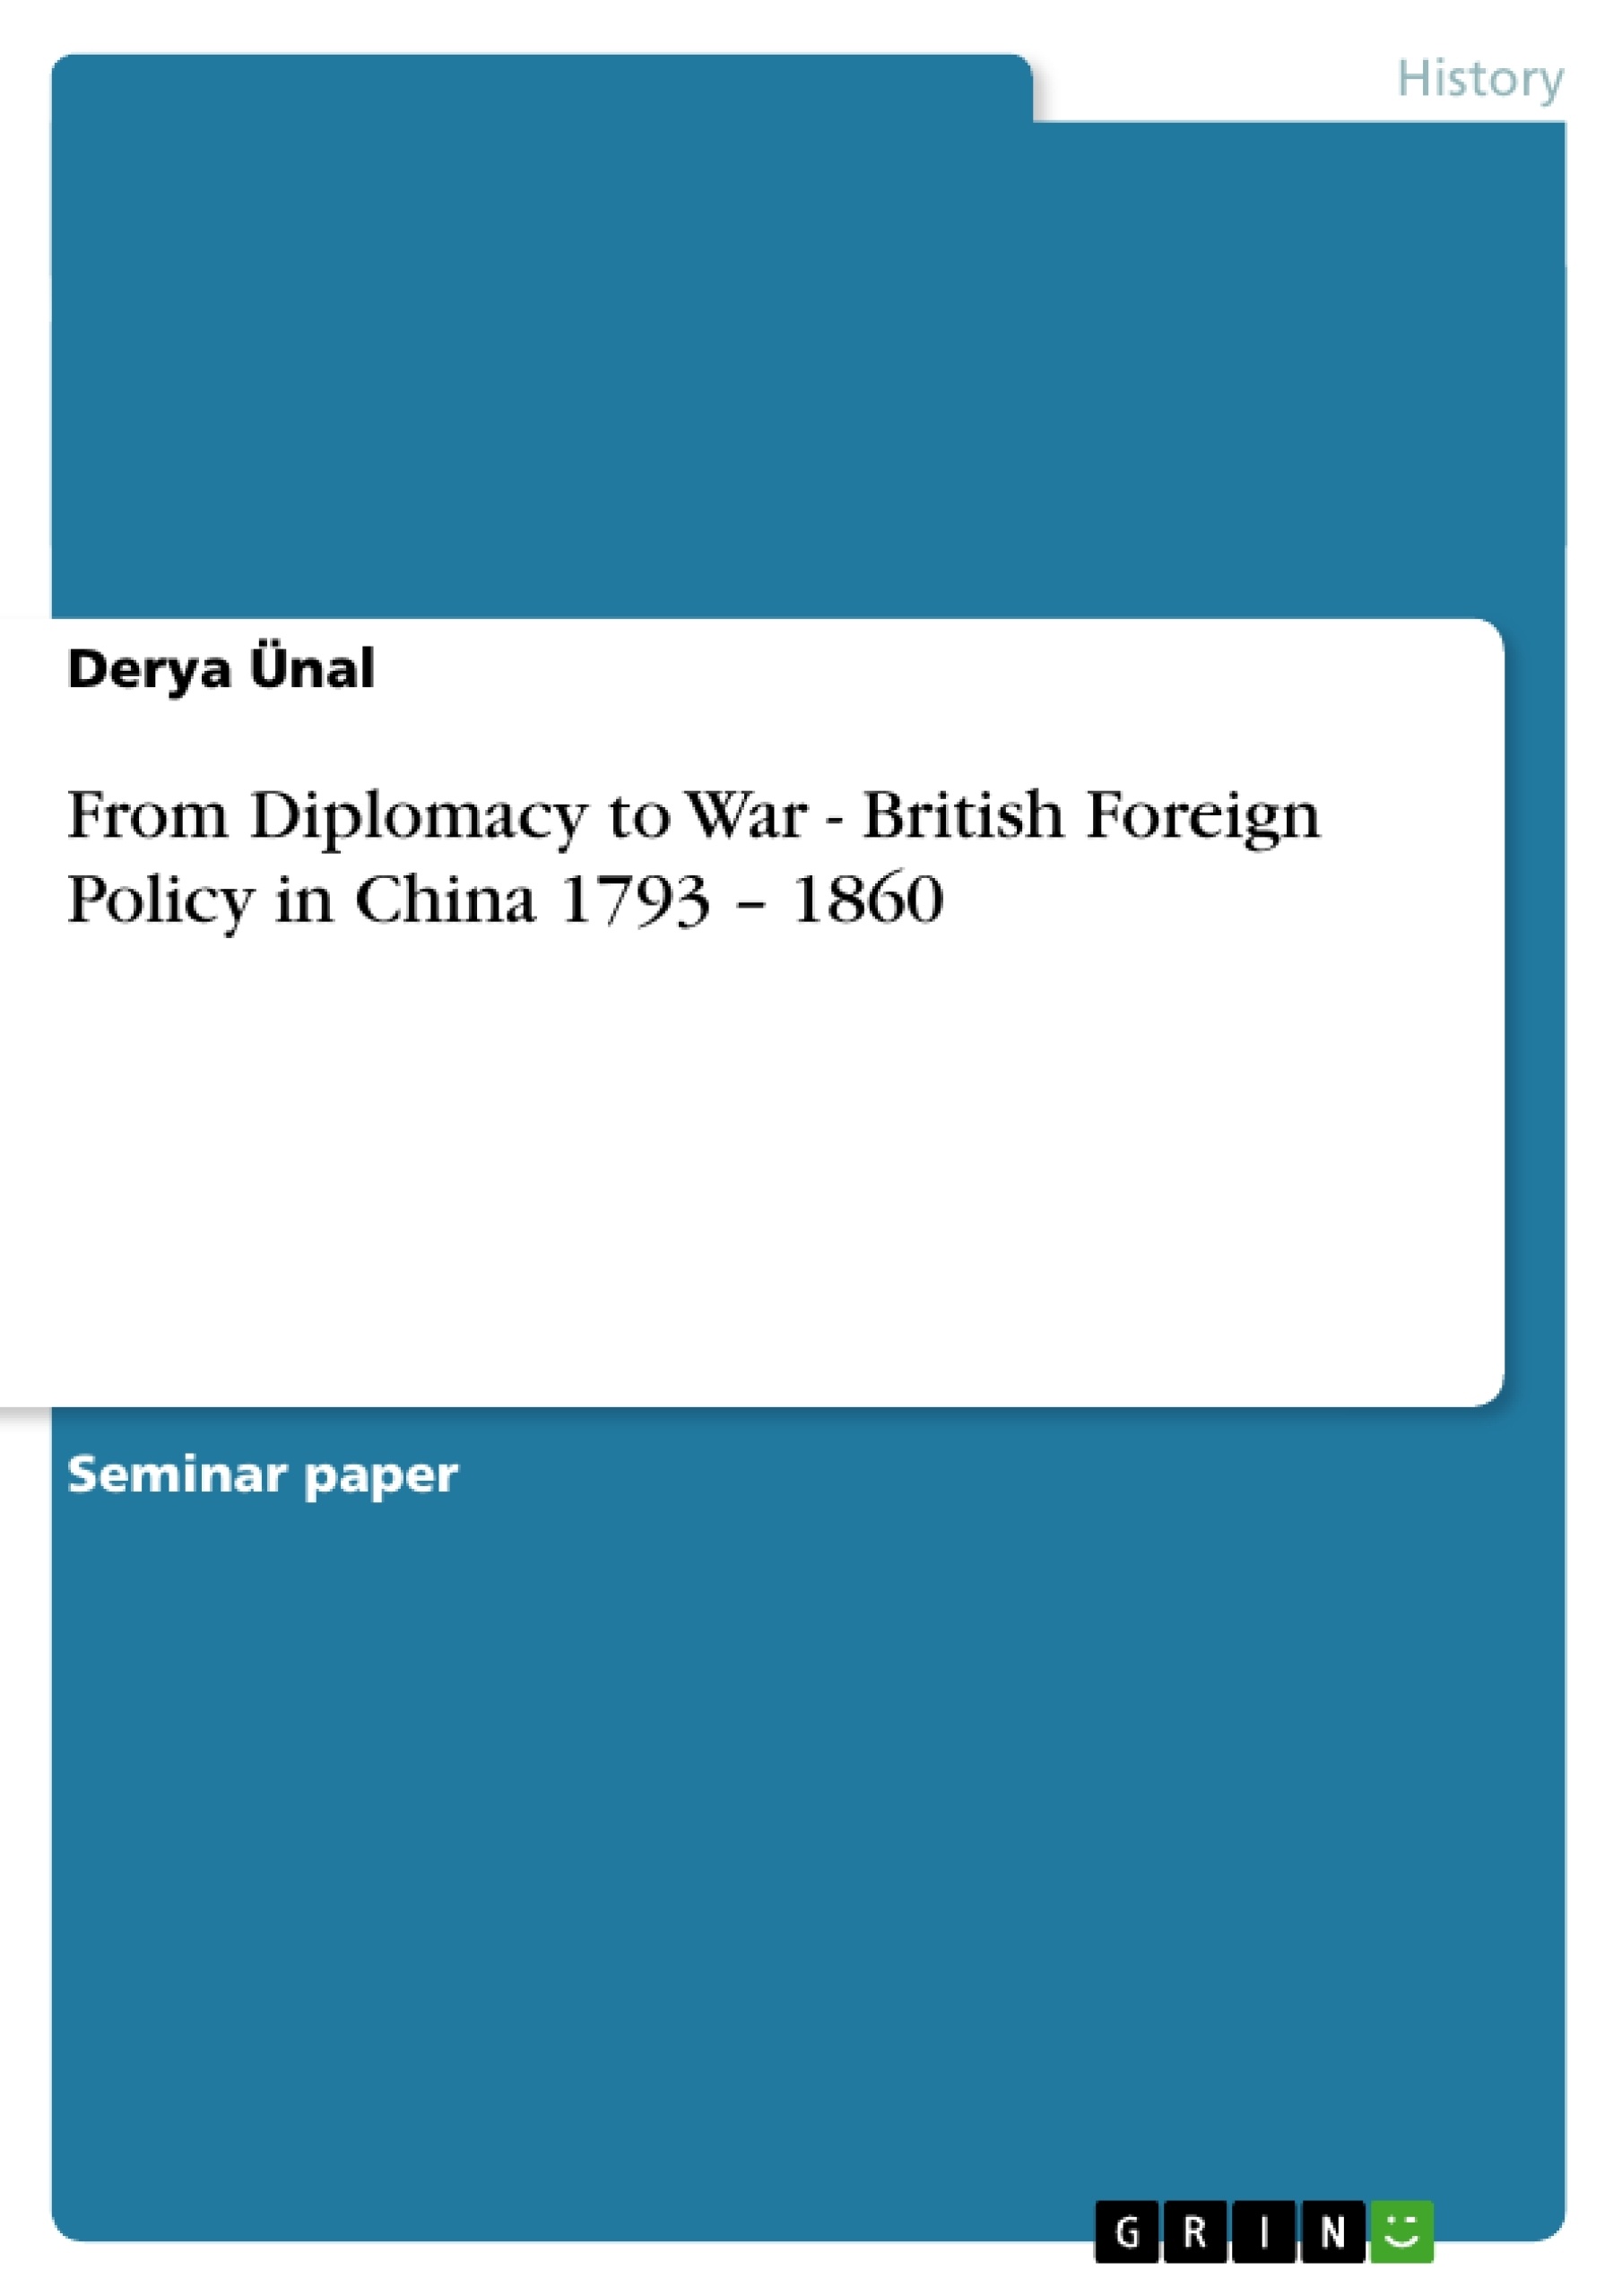 role of british east india company; impact on opium trade when eic’s monopoly ends